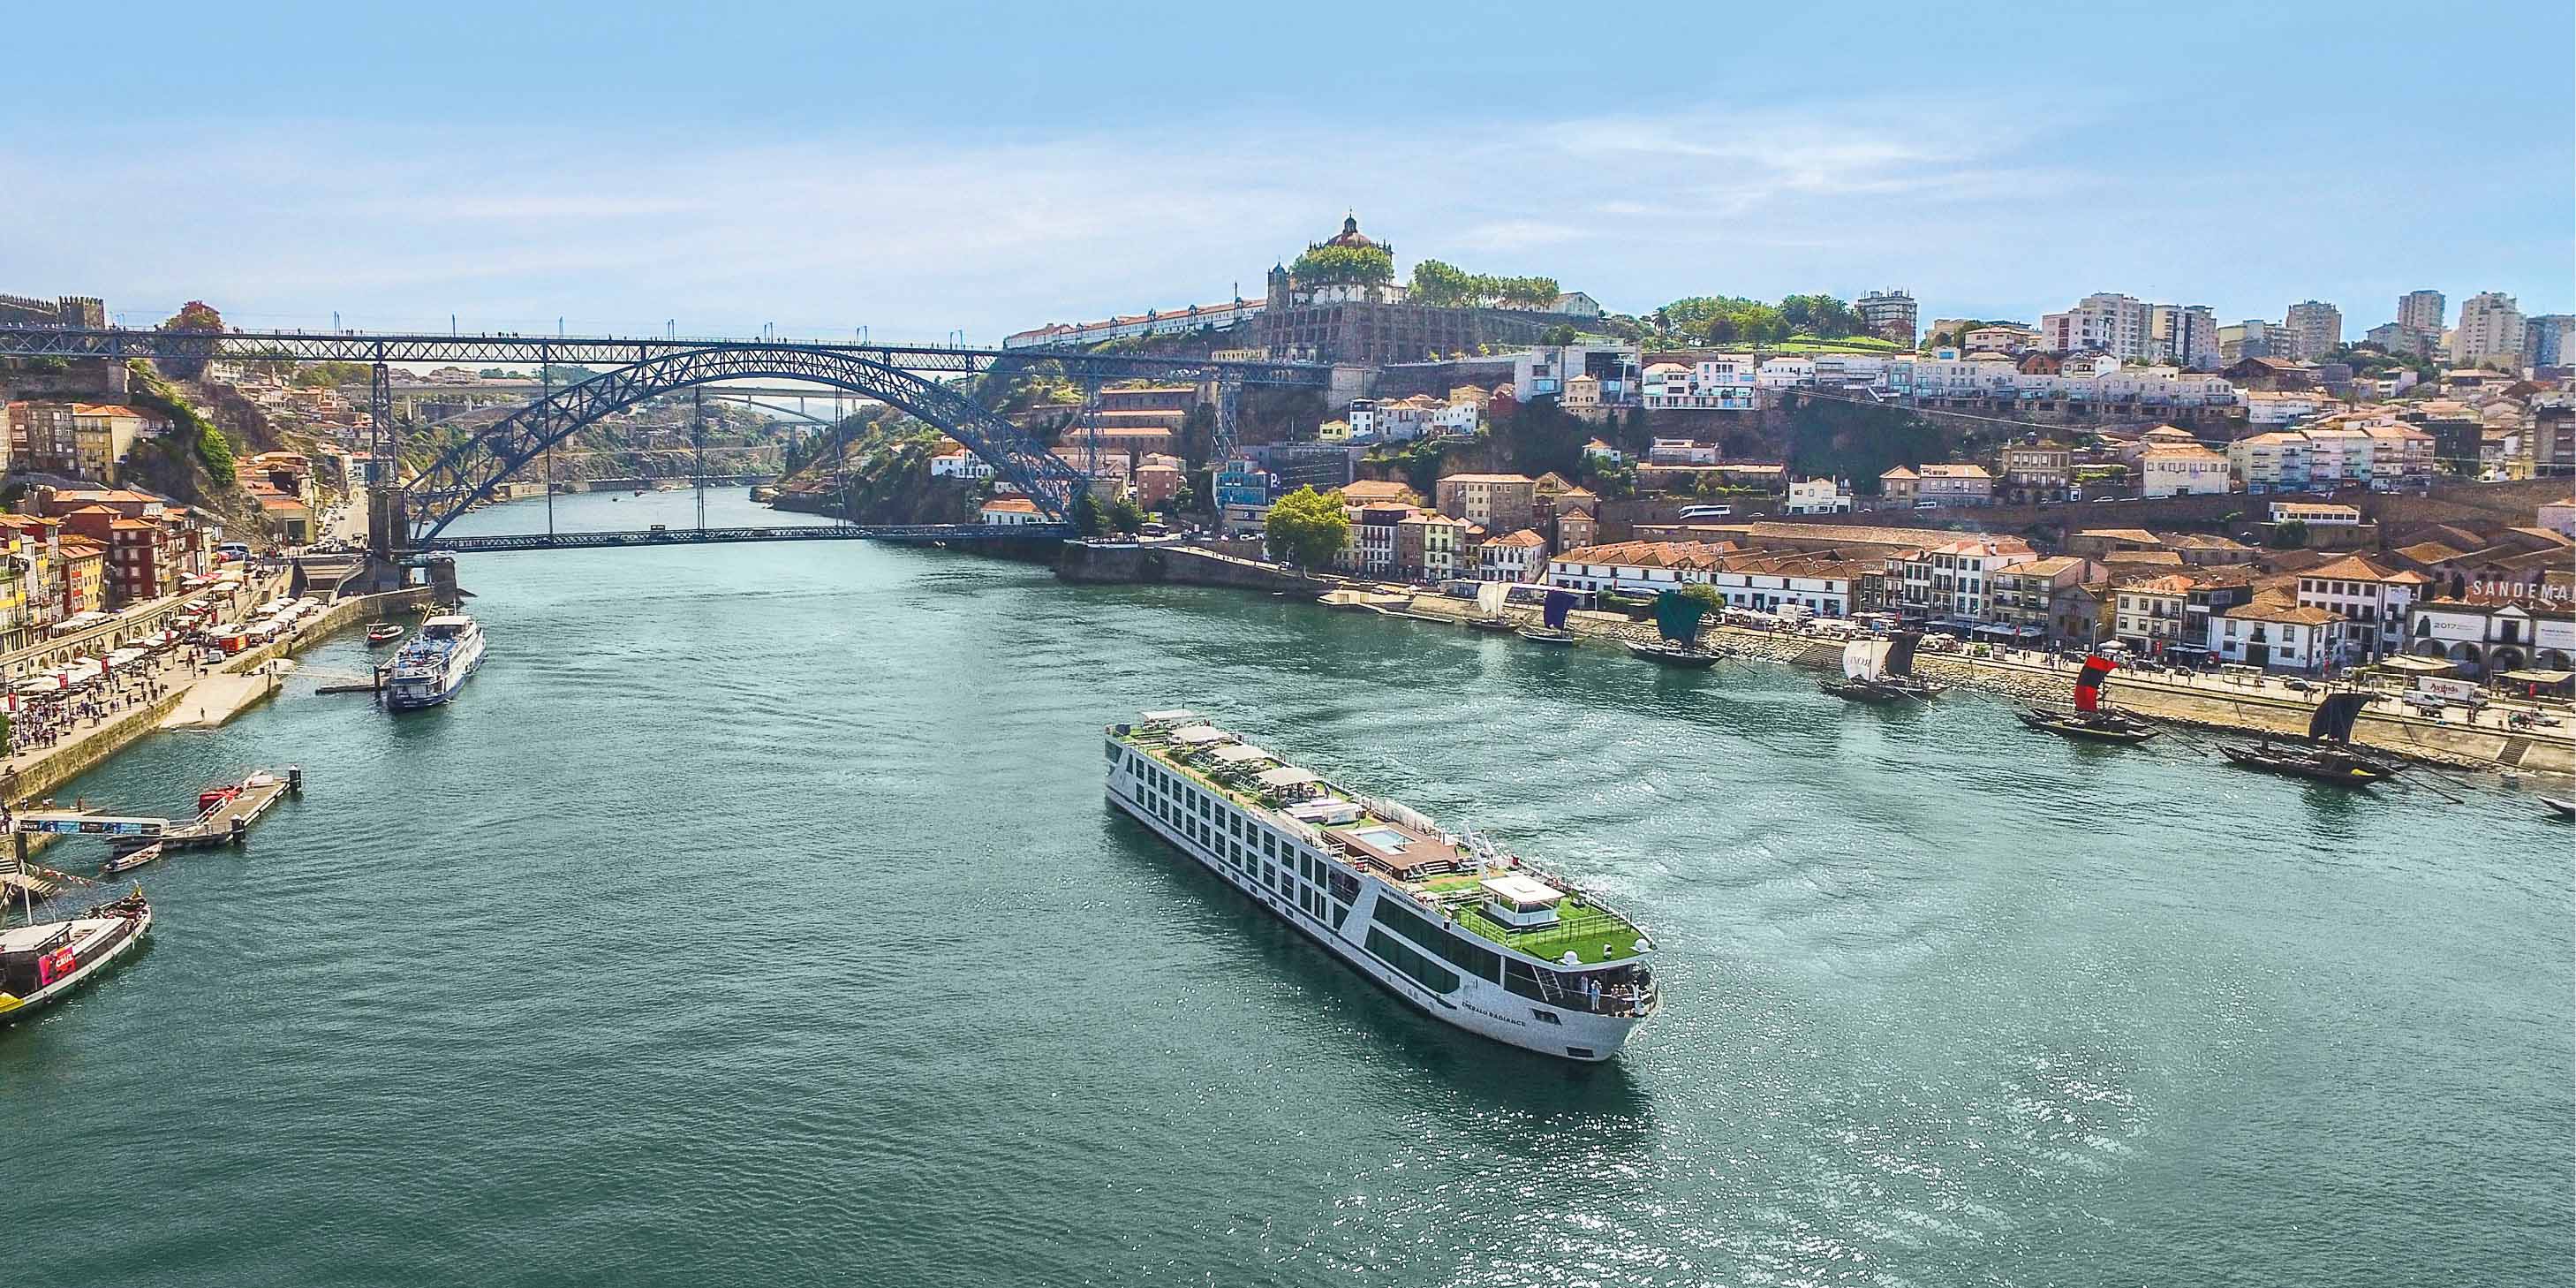 River cruise ship sailing in the middle of a river with the city of Porto on either side and an arched bridge in the background.